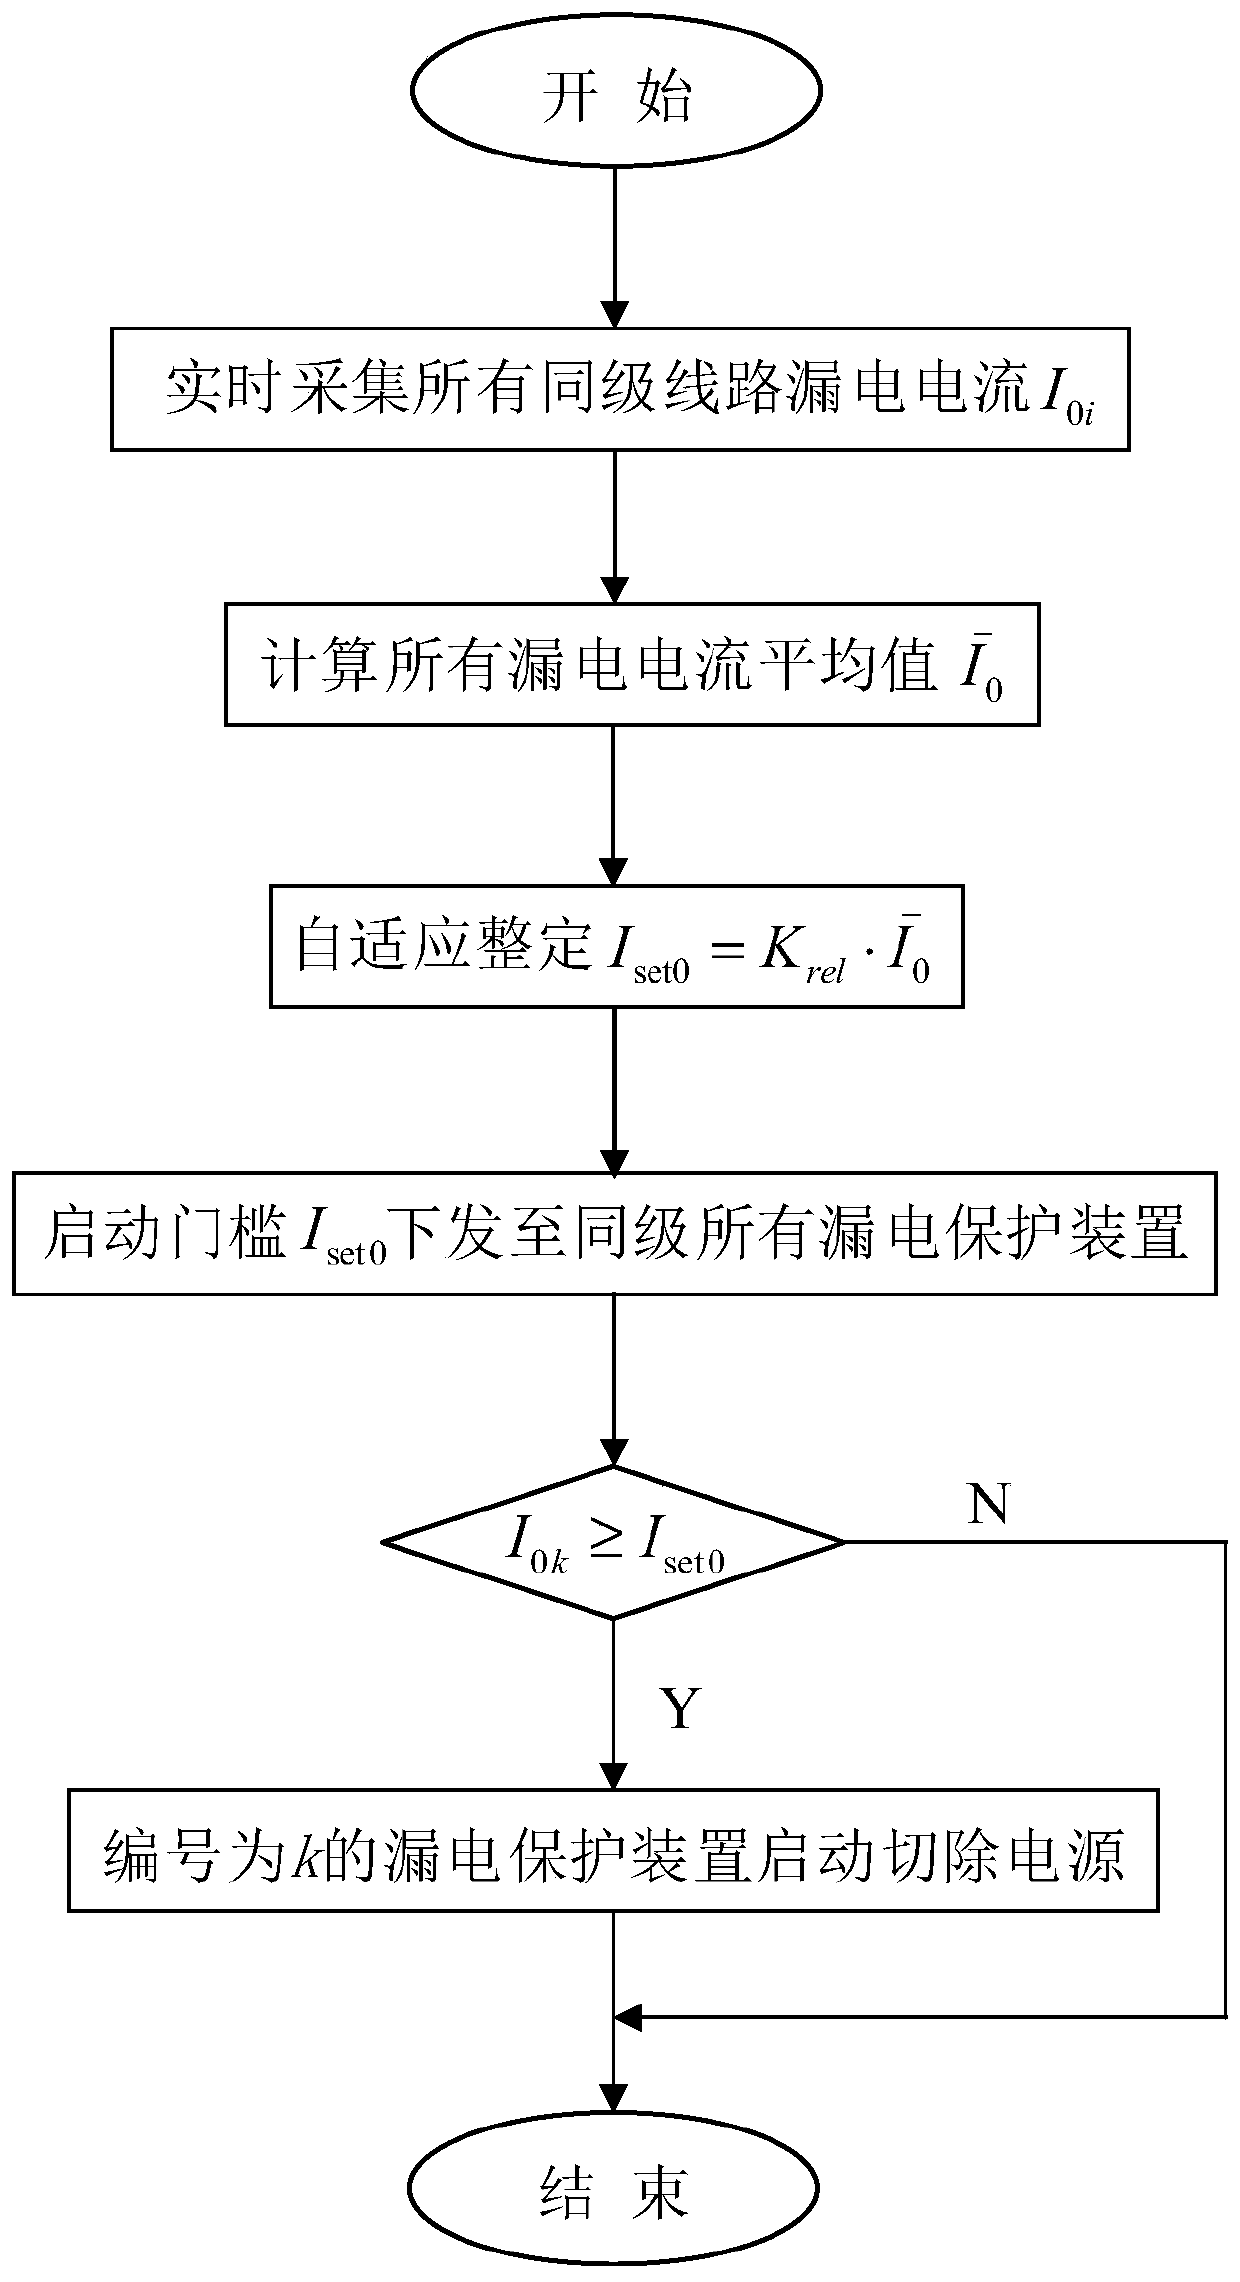 Low-voltage distribution network adaptive electric leakage protection method based on communication